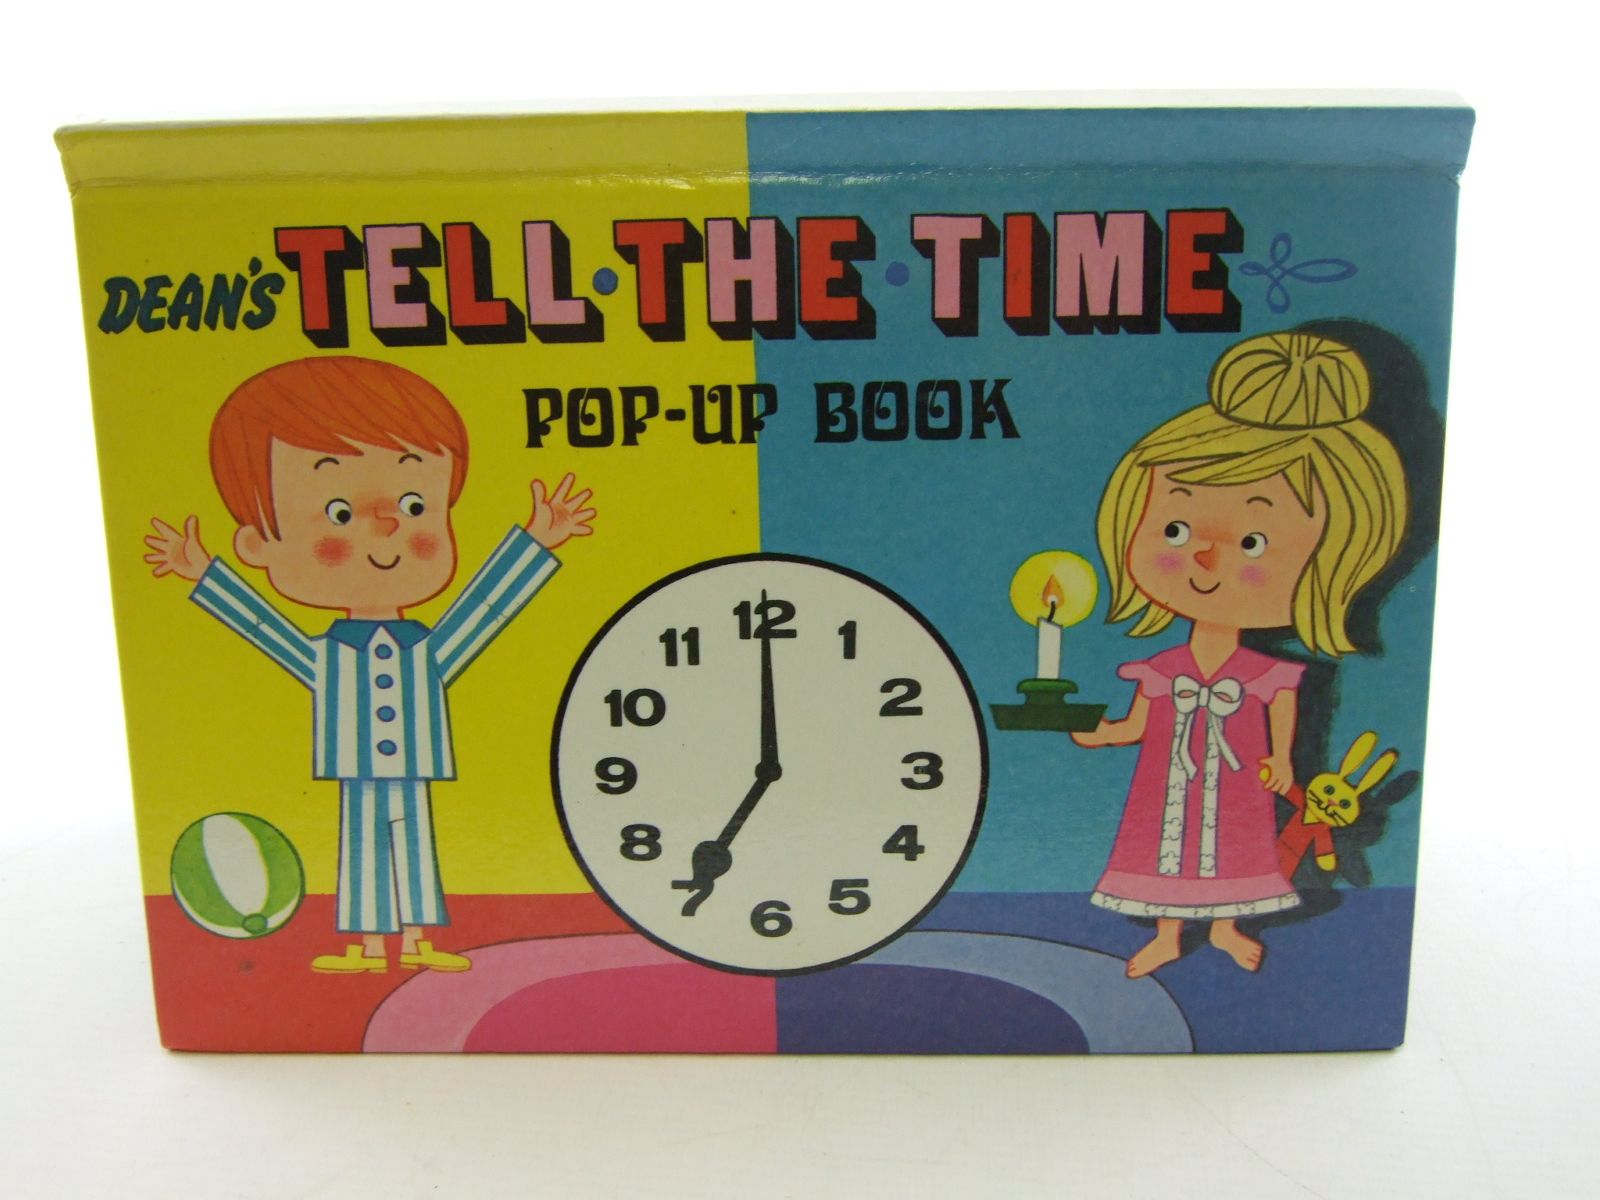 Photo of DEAN'S TELL THE TIME POP-UP BOOK published by Dean &amp; Son Ltd. (STOCK CODE: 1107590)  for sale by Stella & Rose's Books